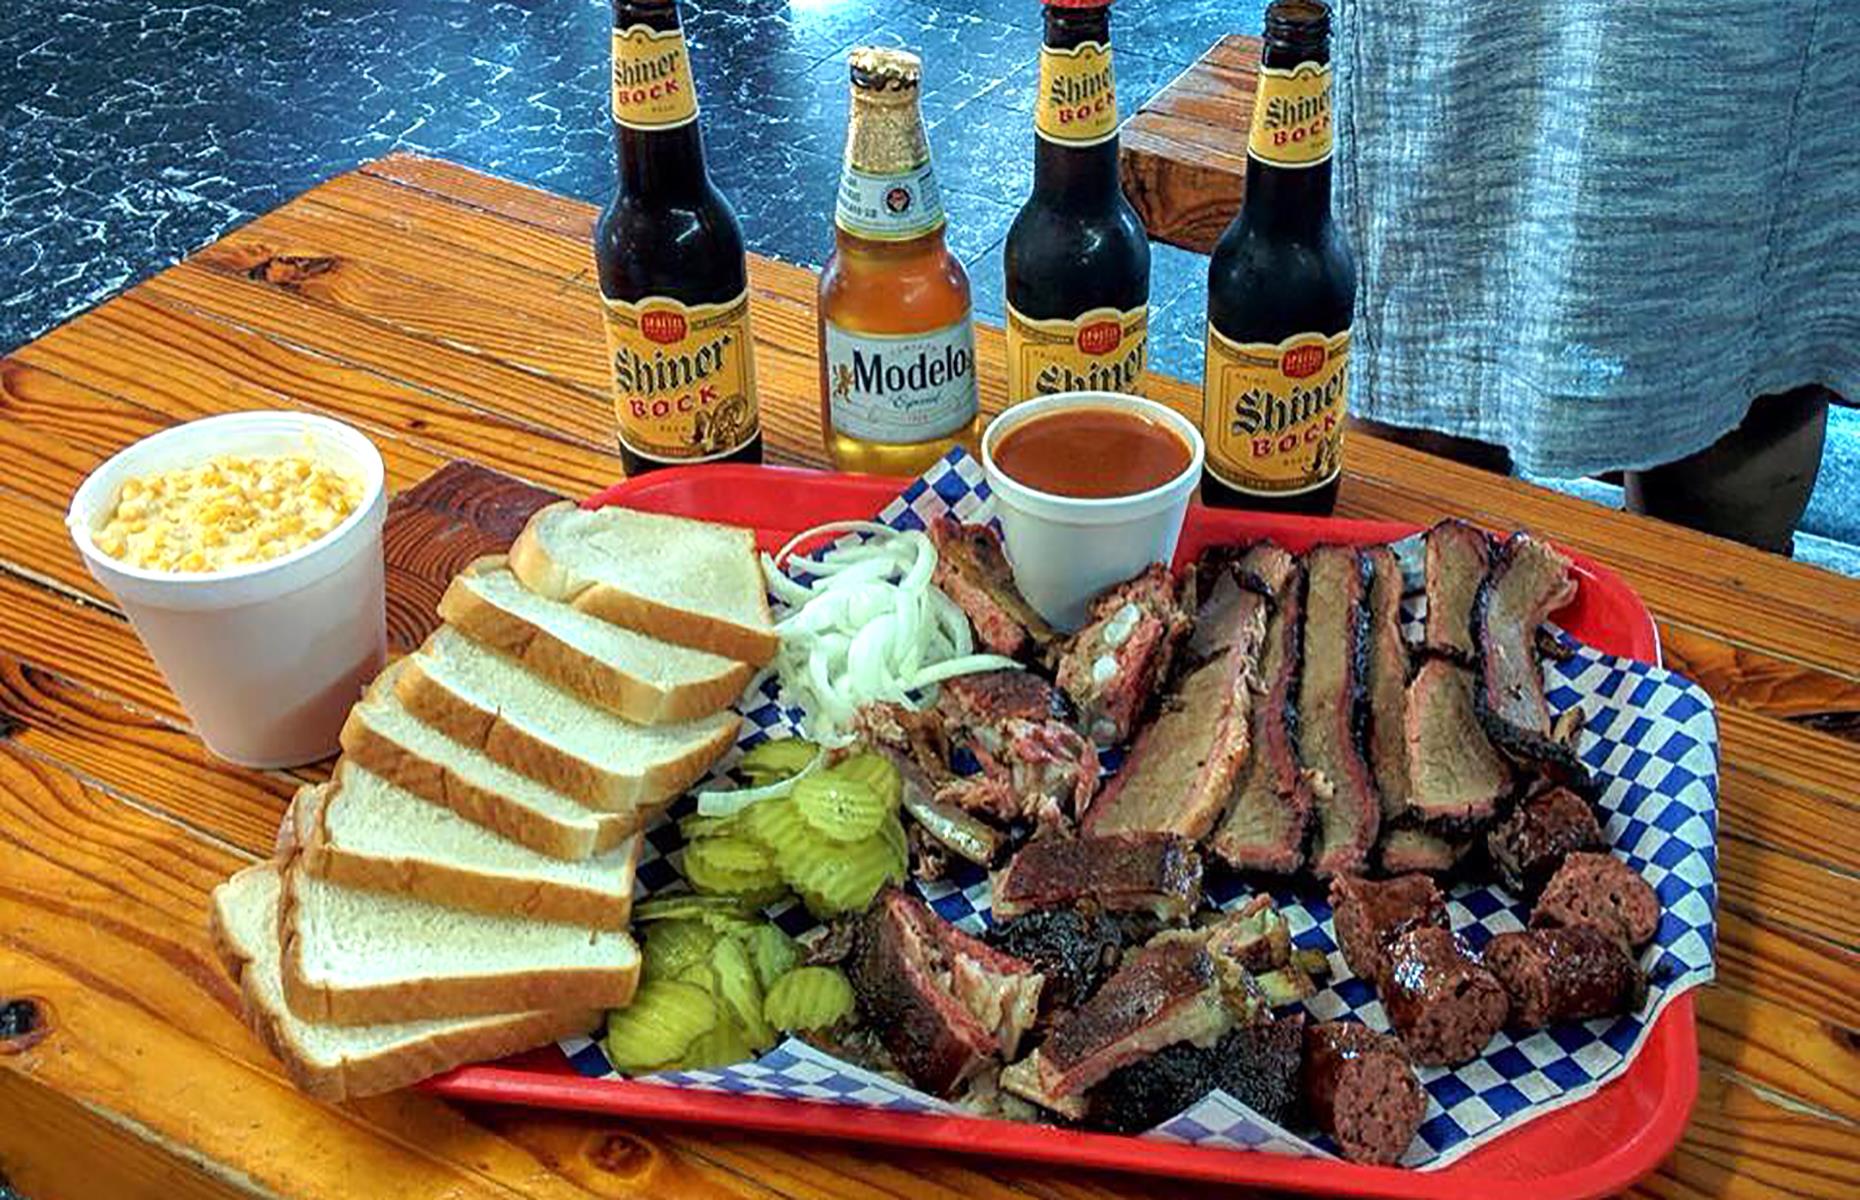 <p>There's no better state for a barbecue tour and <a href="https://foodchicktours.com/activities/barbecue-road-trip/">this is a pilgrimage</a> to the best spots for ribs, brisket and juicy steaks in San Antonio. The tour lasts for four hours and carnivores will stop off at beloved joints like Smoke Shack BBQ, which serves barbecued meat with a whole lot of Southern hospitality. </p>